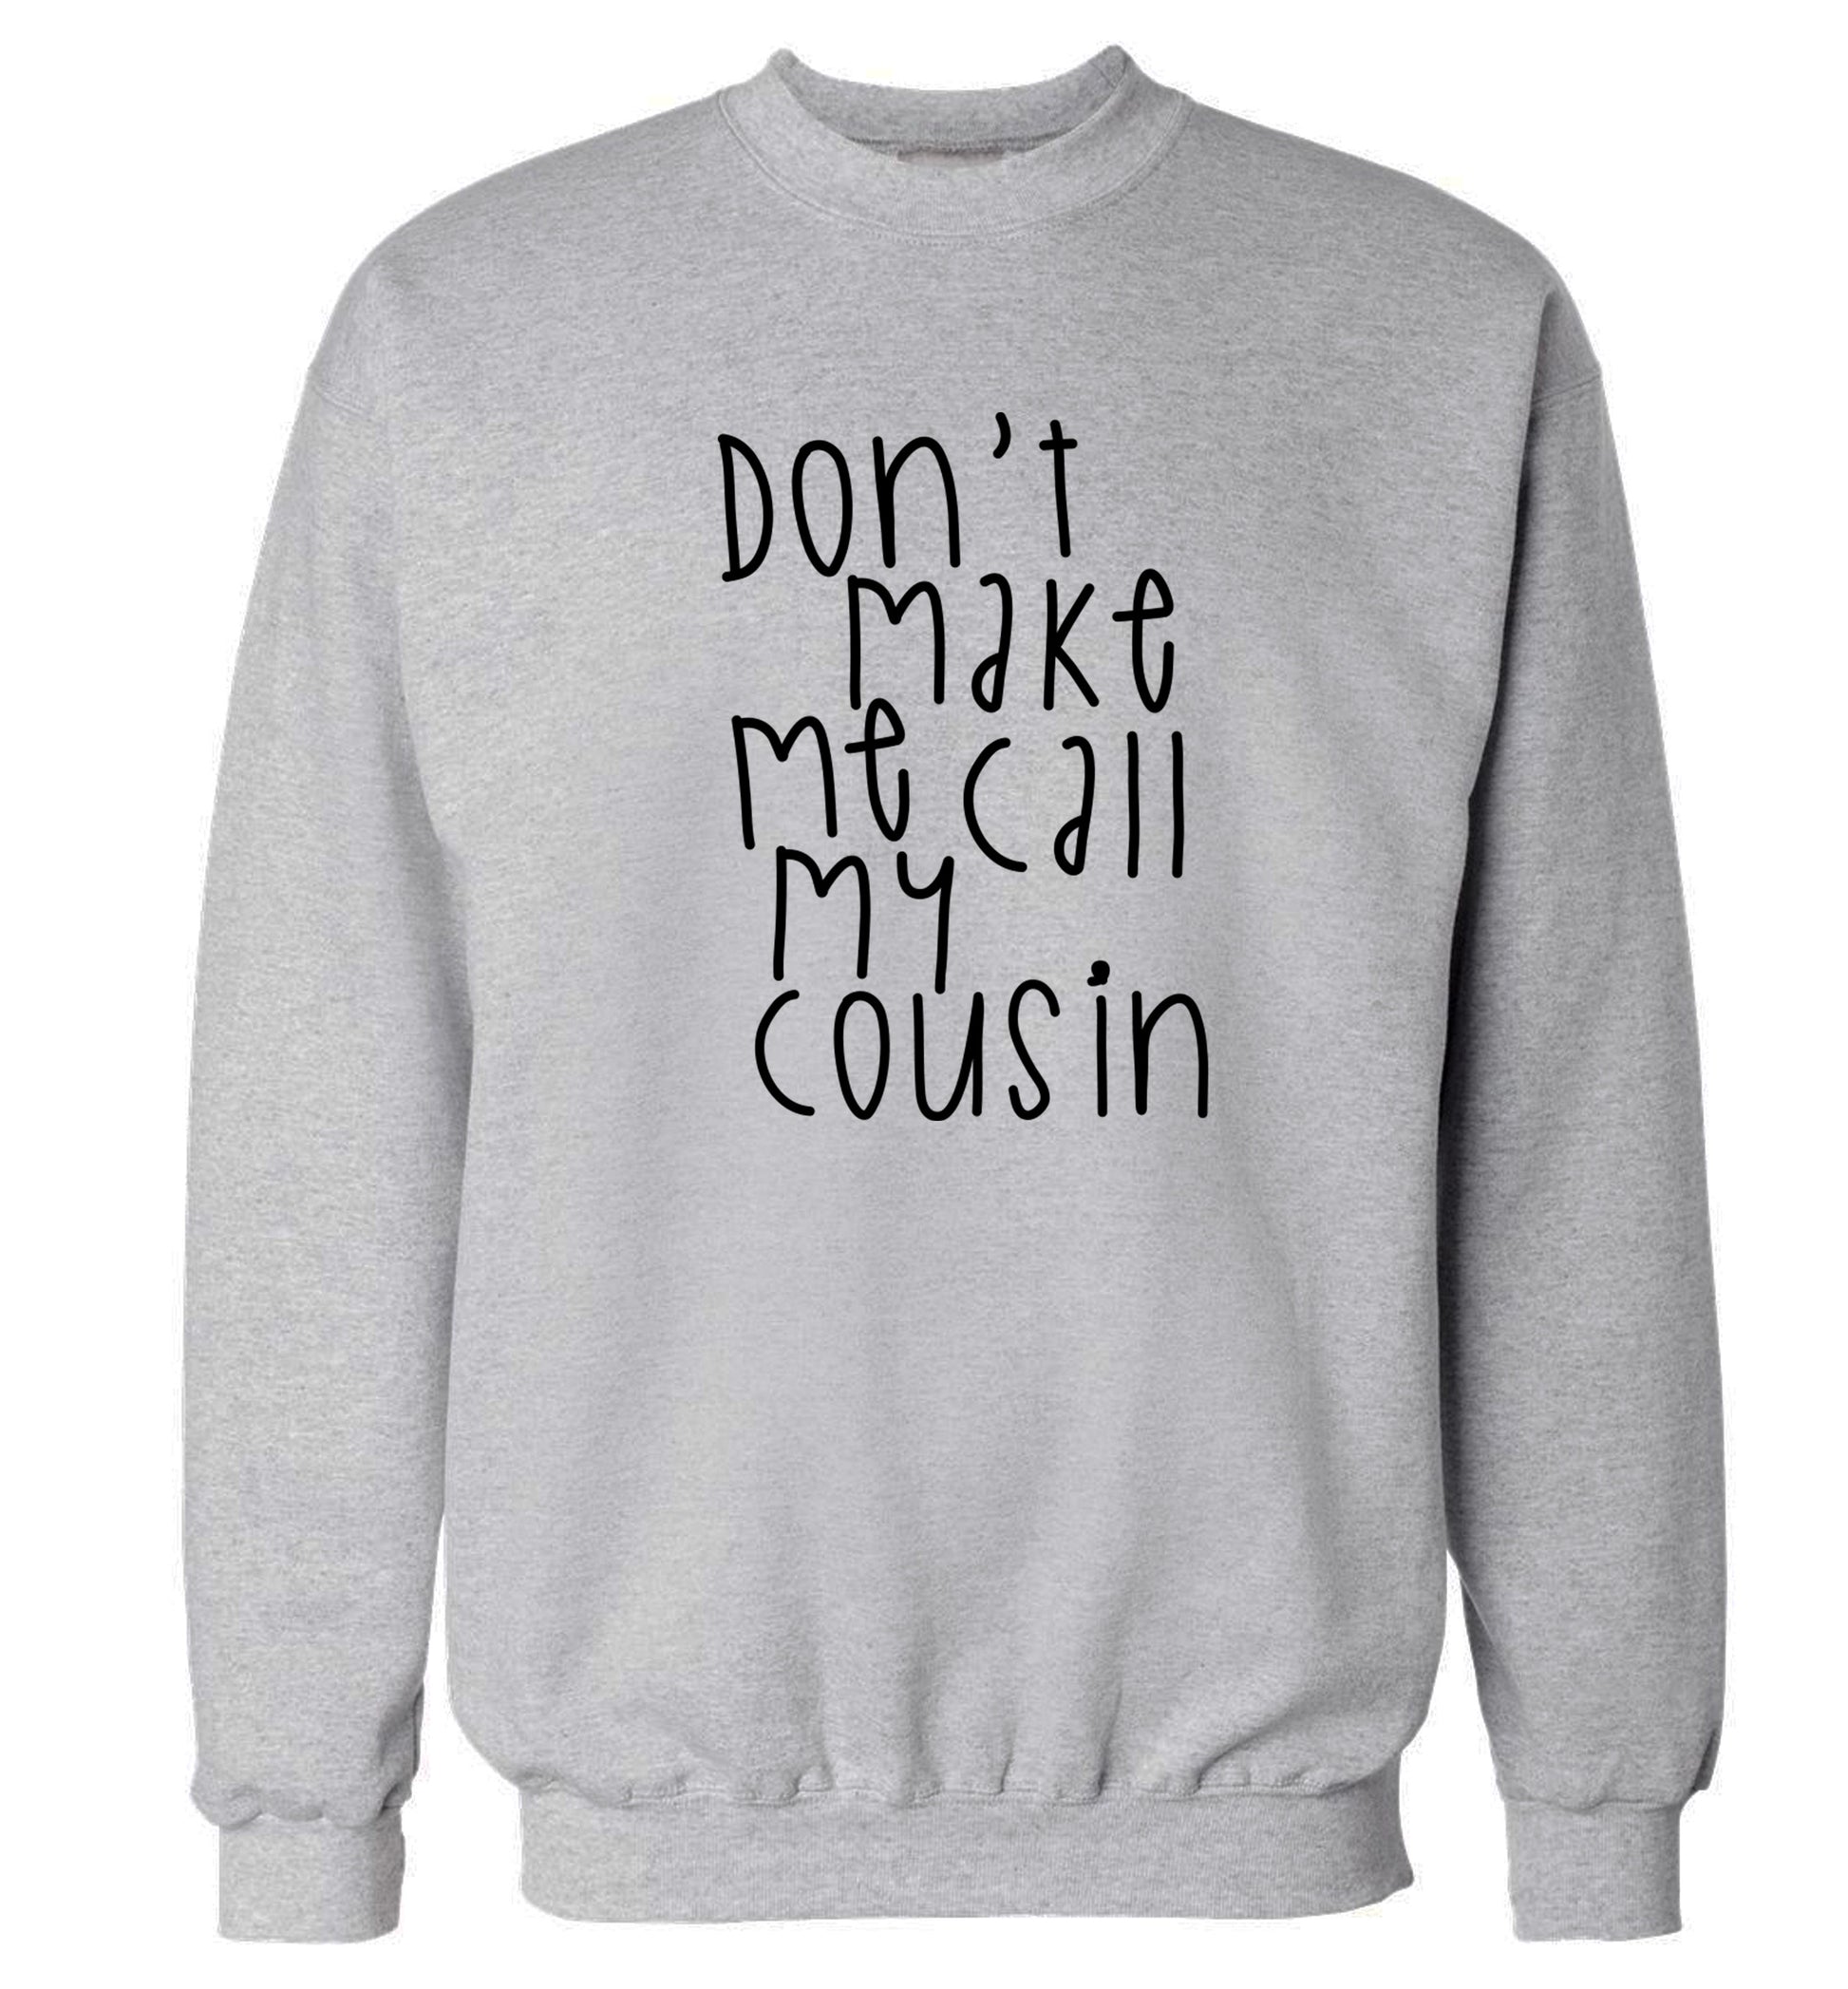 Don't make me call my cousin Adult's unisex grey Sweater 2XL